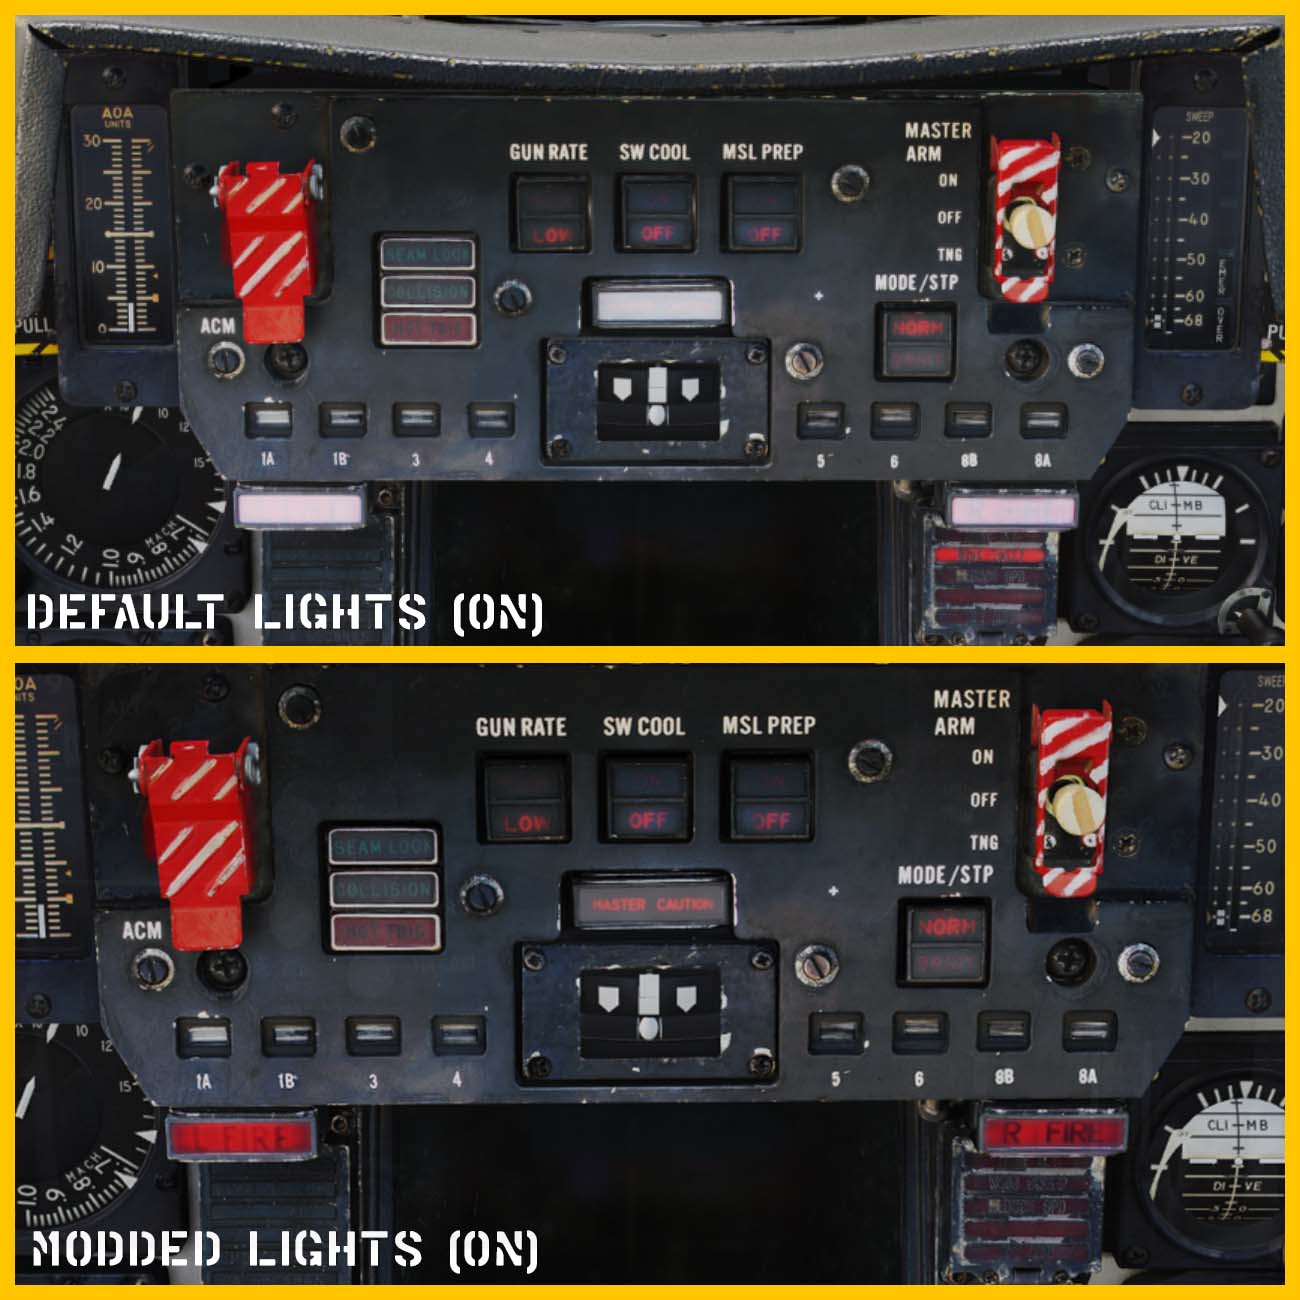 Readable F-14 MASTER CAUTION and L/R Fire Lights